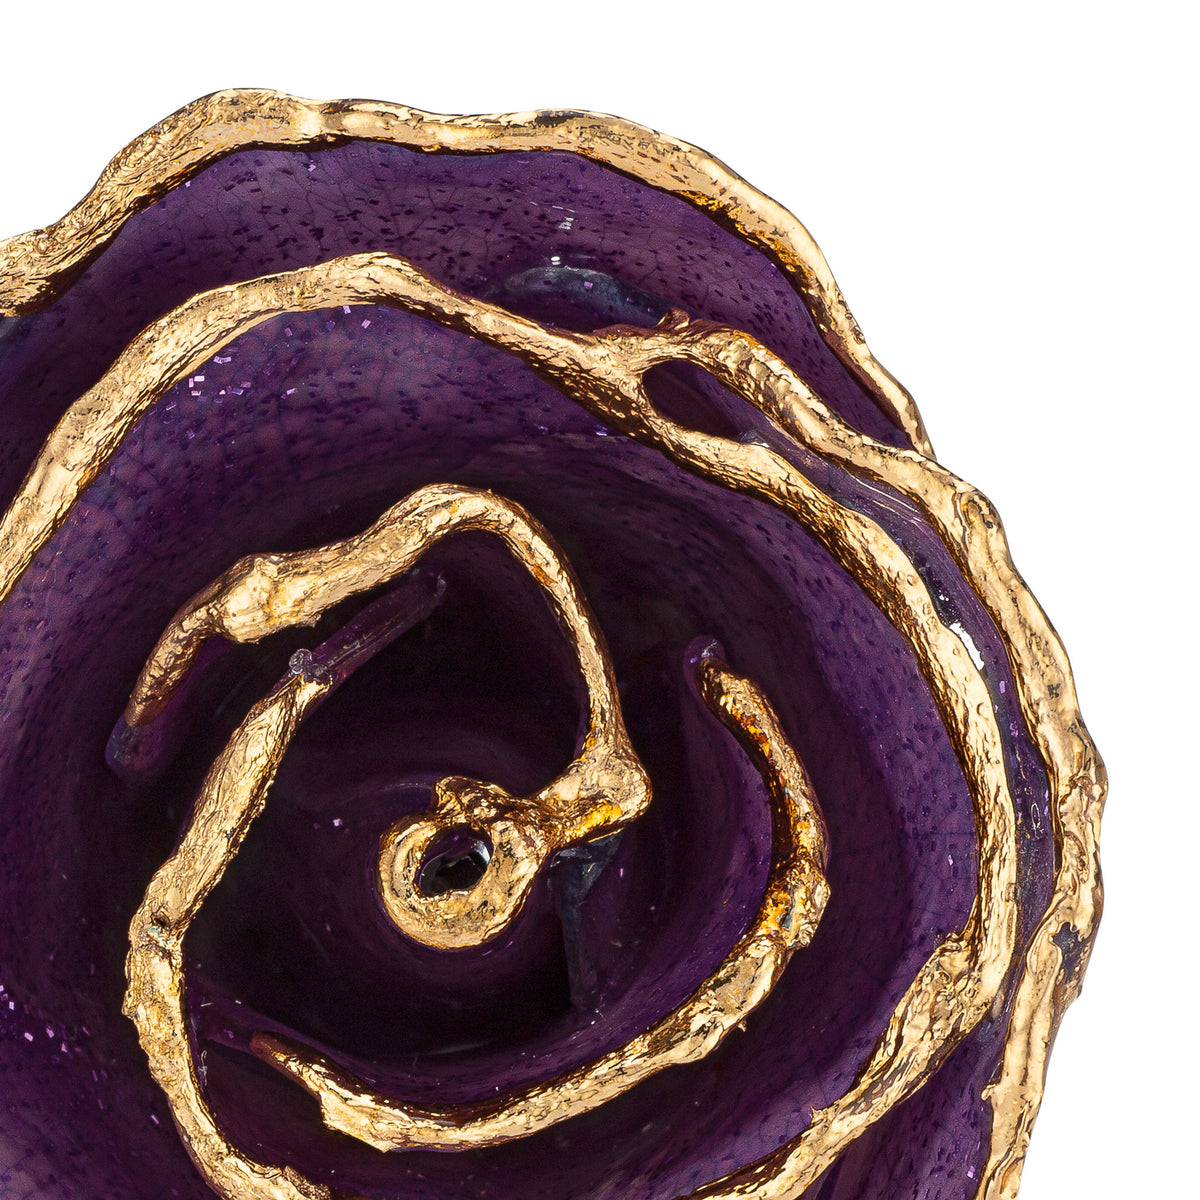 24K Gold Trimmed Forever Rose with Amethyst (purple color) with sparkles suspended in the finish. View of Stem, Leaves, and Rose Petals and Showing Detail of Gold Zoomed in View from top